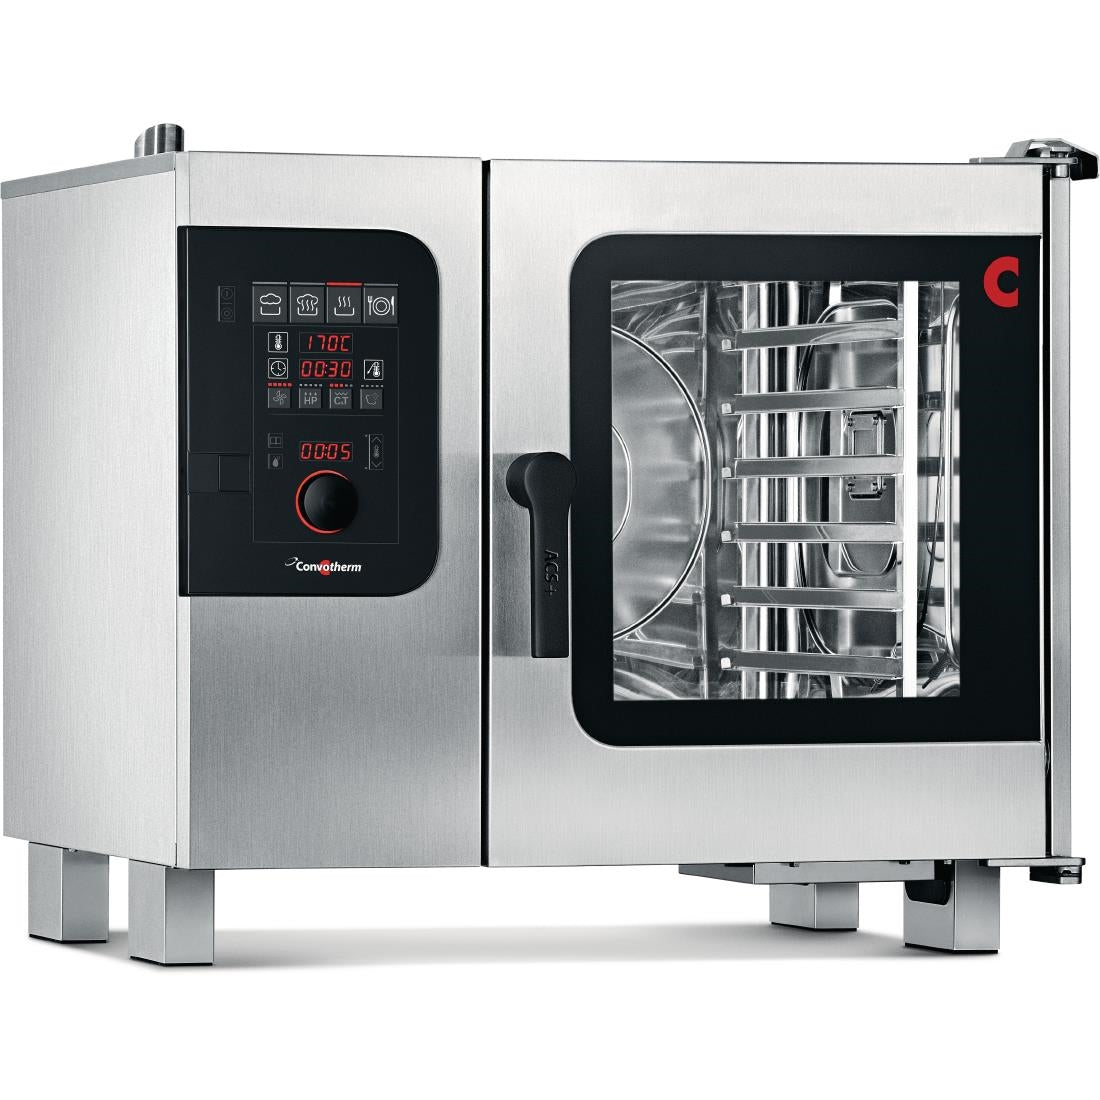 DR442-MO Convotherm 4 easyDial Combi Oven 6 x 1 x1 GN Grid JD Catering Equipment Solutions Ltd